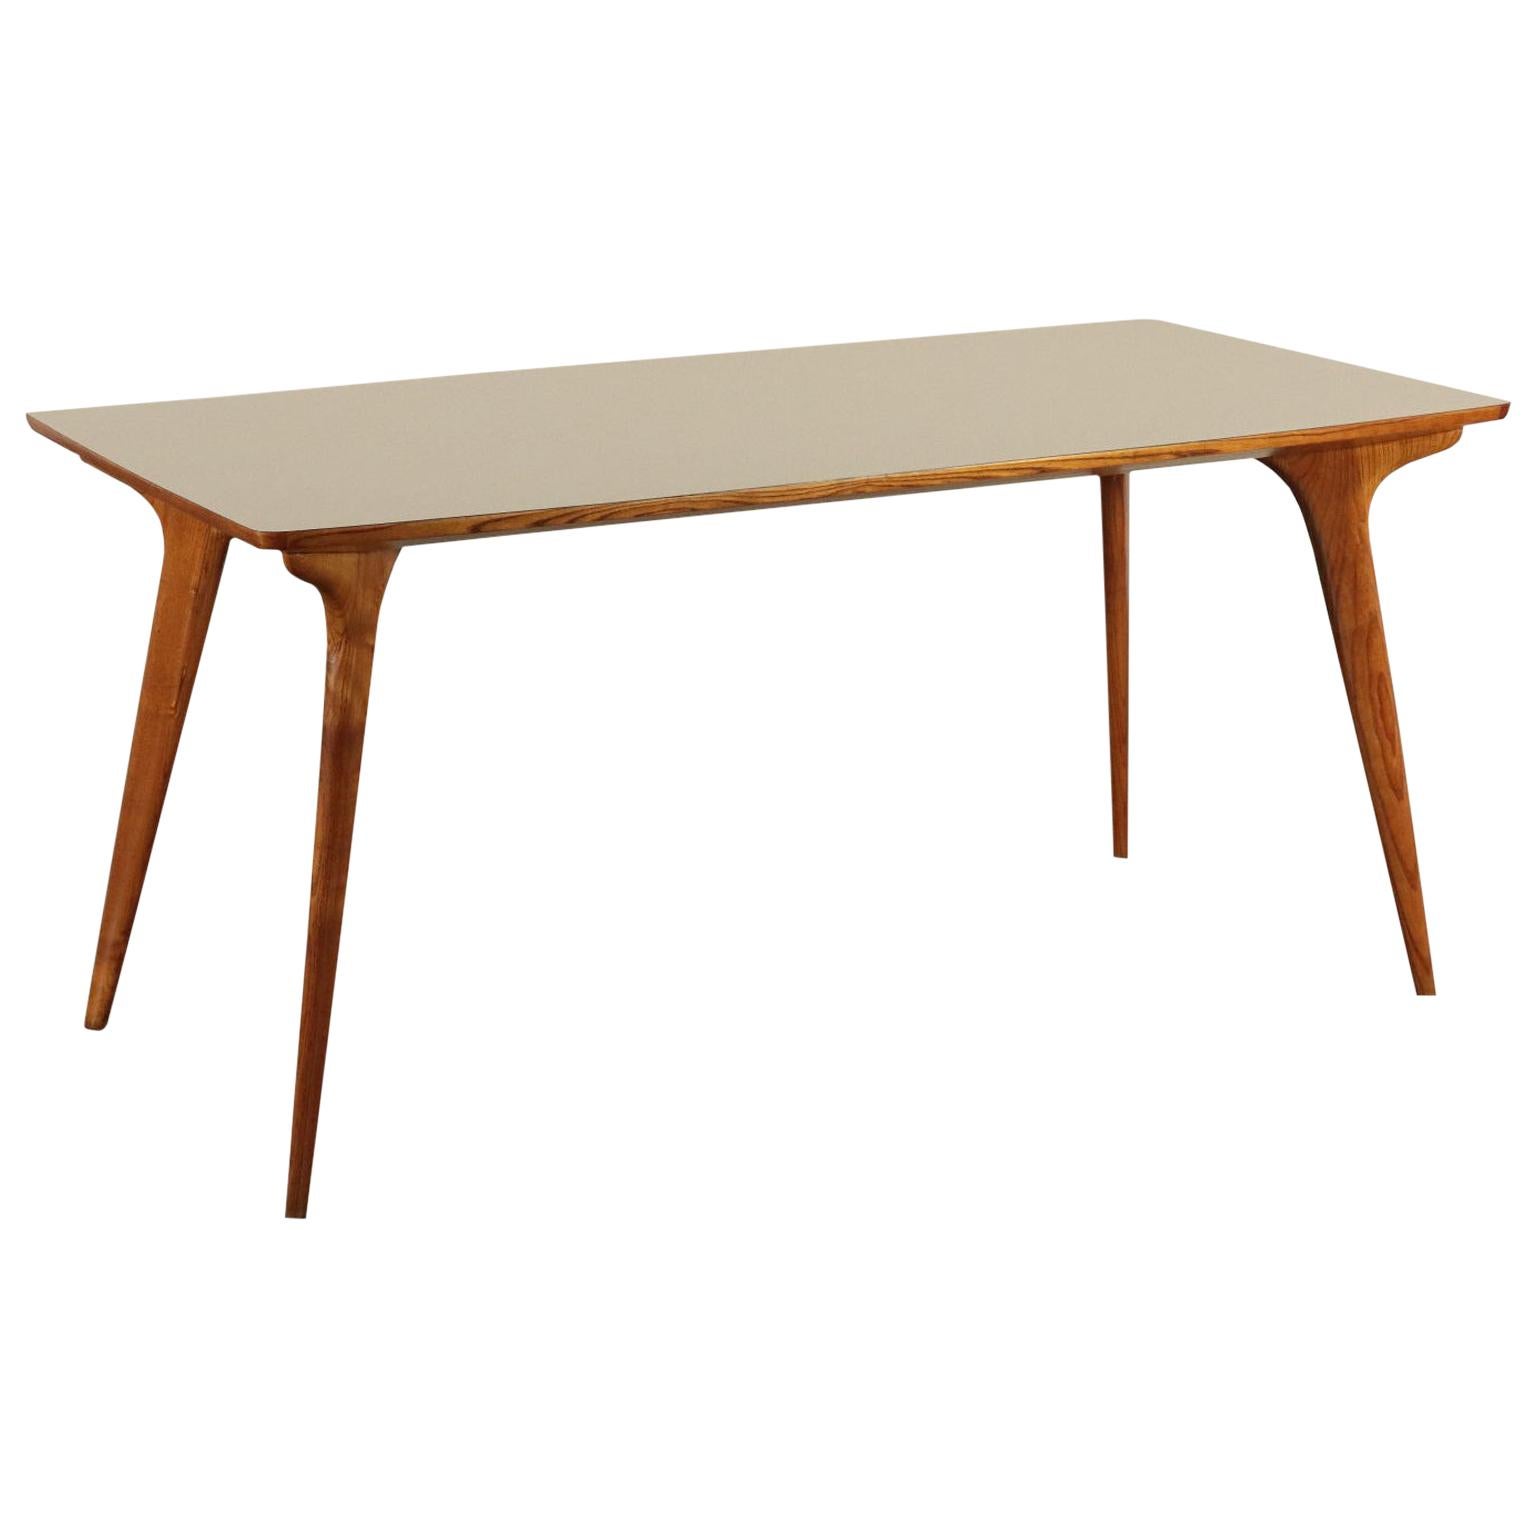 Table, Beech and Formica, Italy 1950s Italian Production